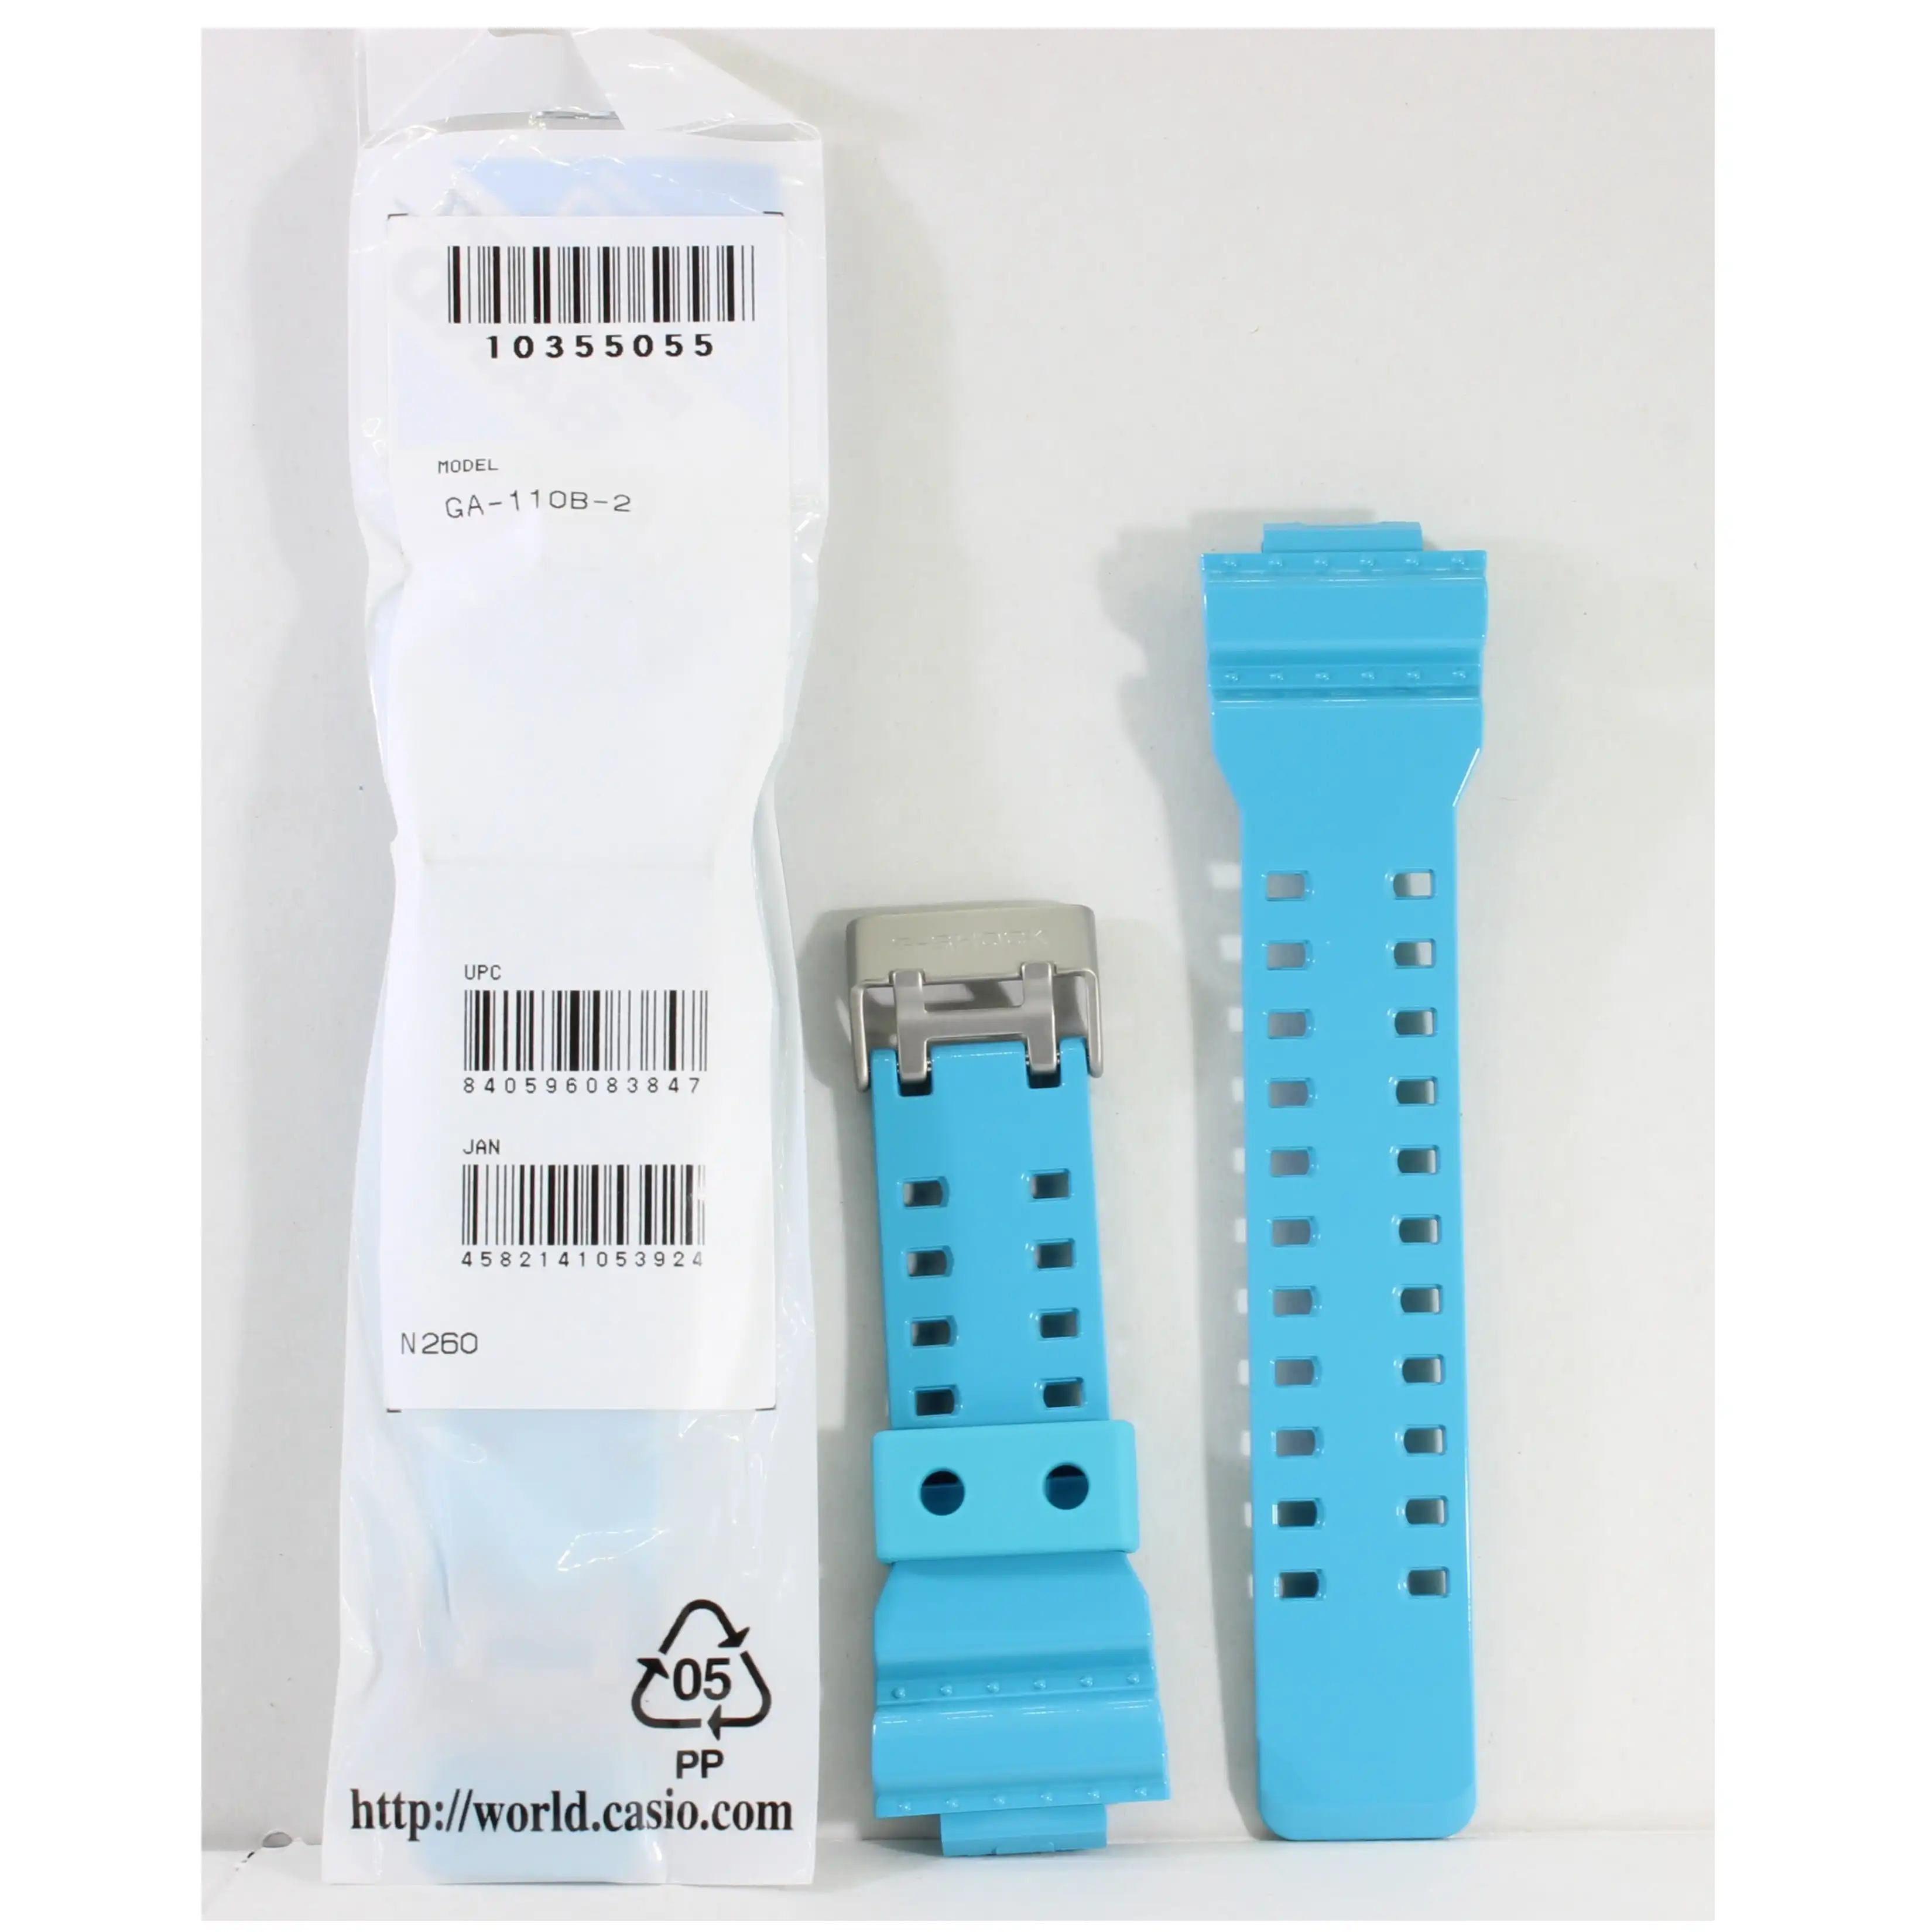 Casio G-Shock Shiny Blue Genuine Replacement Strap 10355055 to suit GA-110B-2A